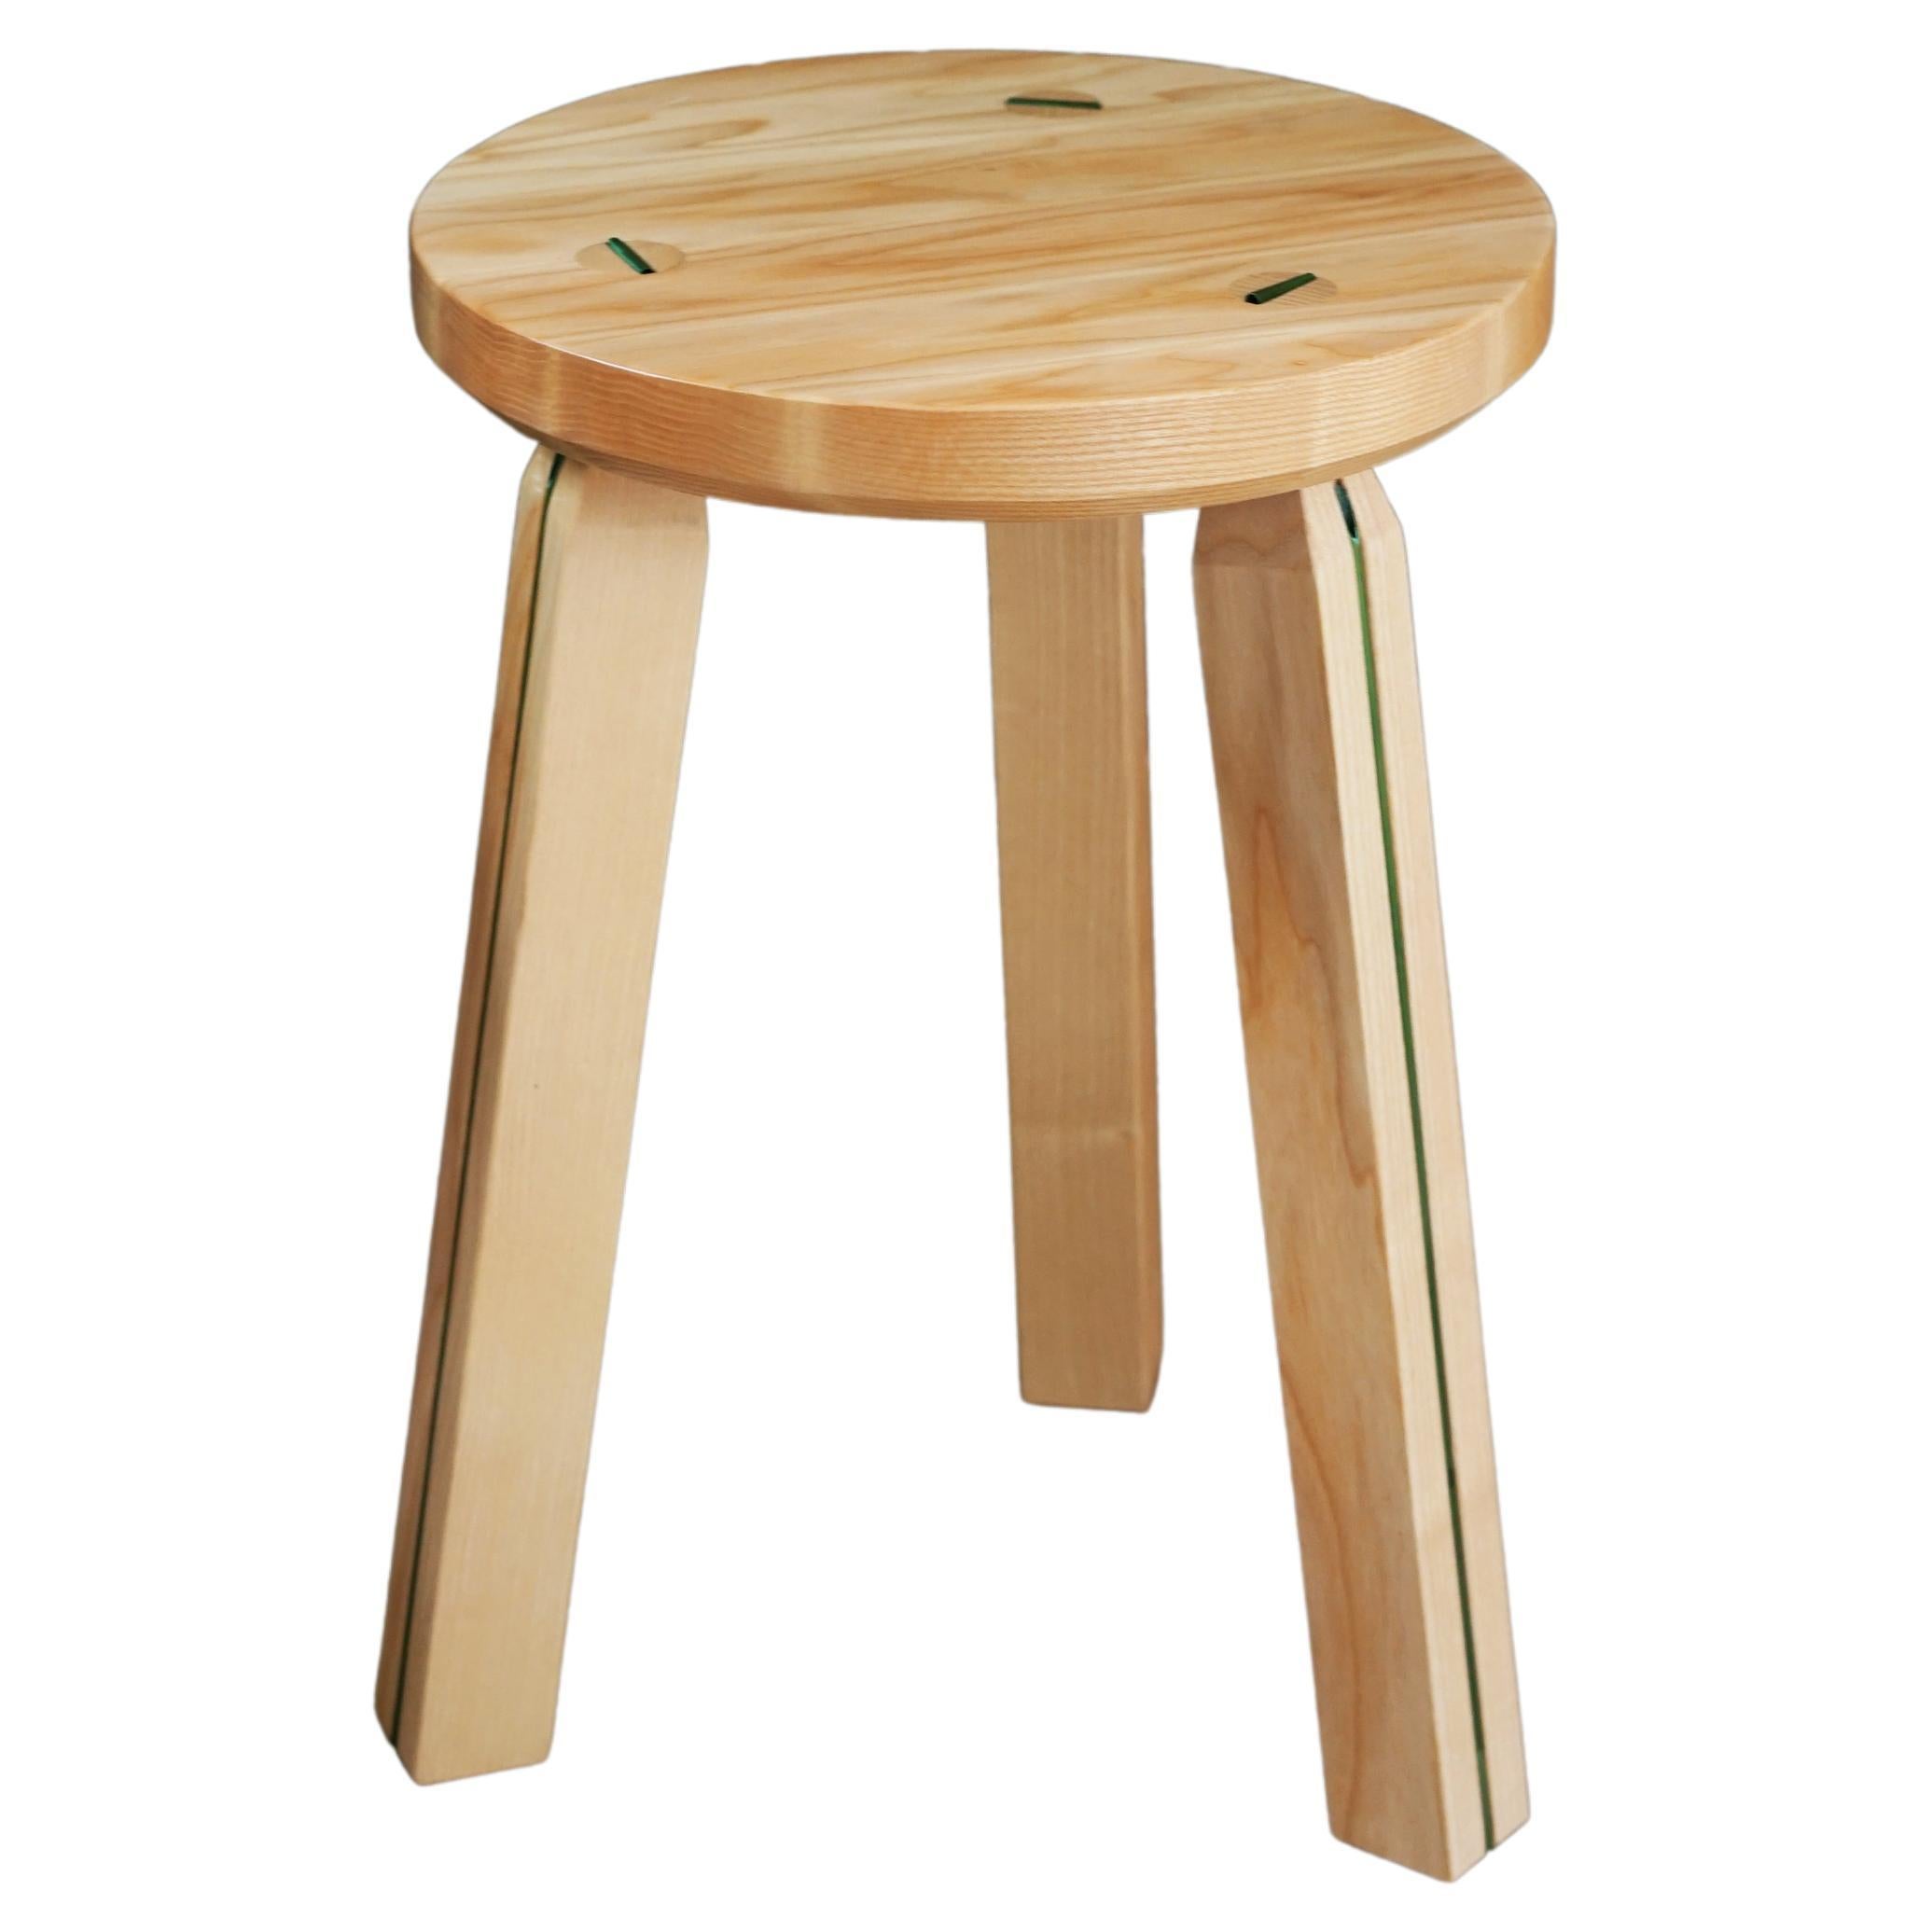 Stools, Ash Wood, Handmade in France, OROS Edition For Sale